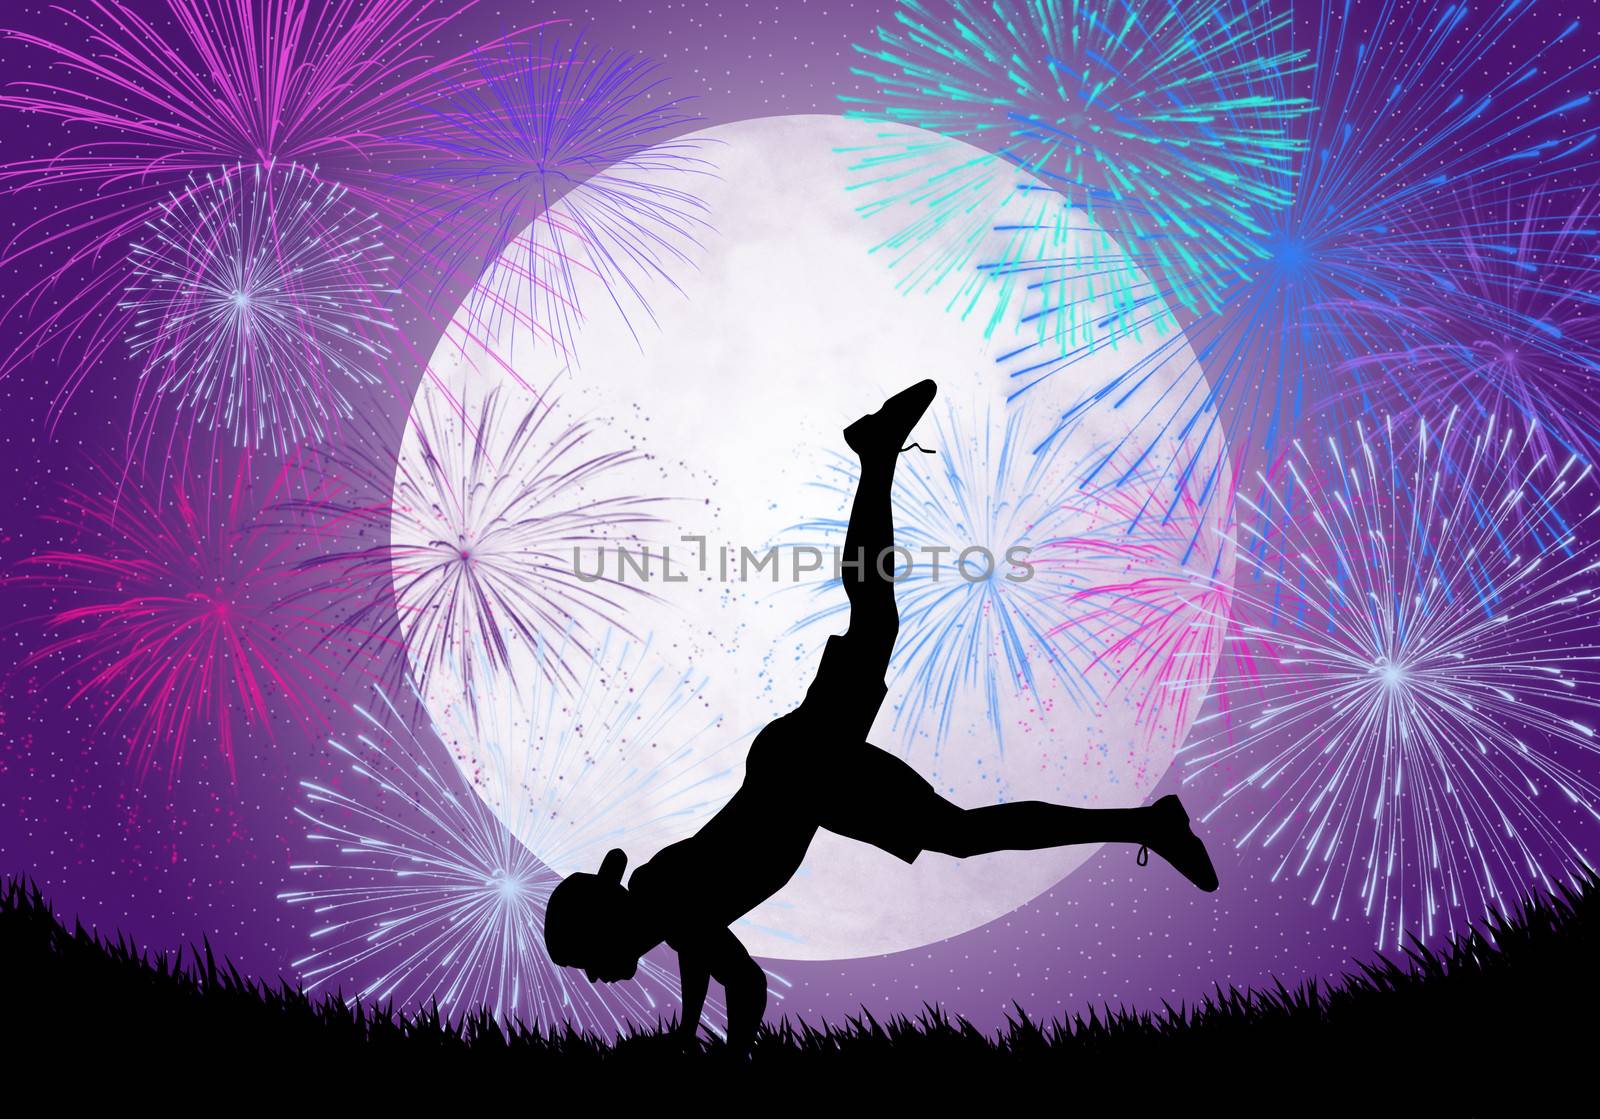 Breakdance in the night with fireworks